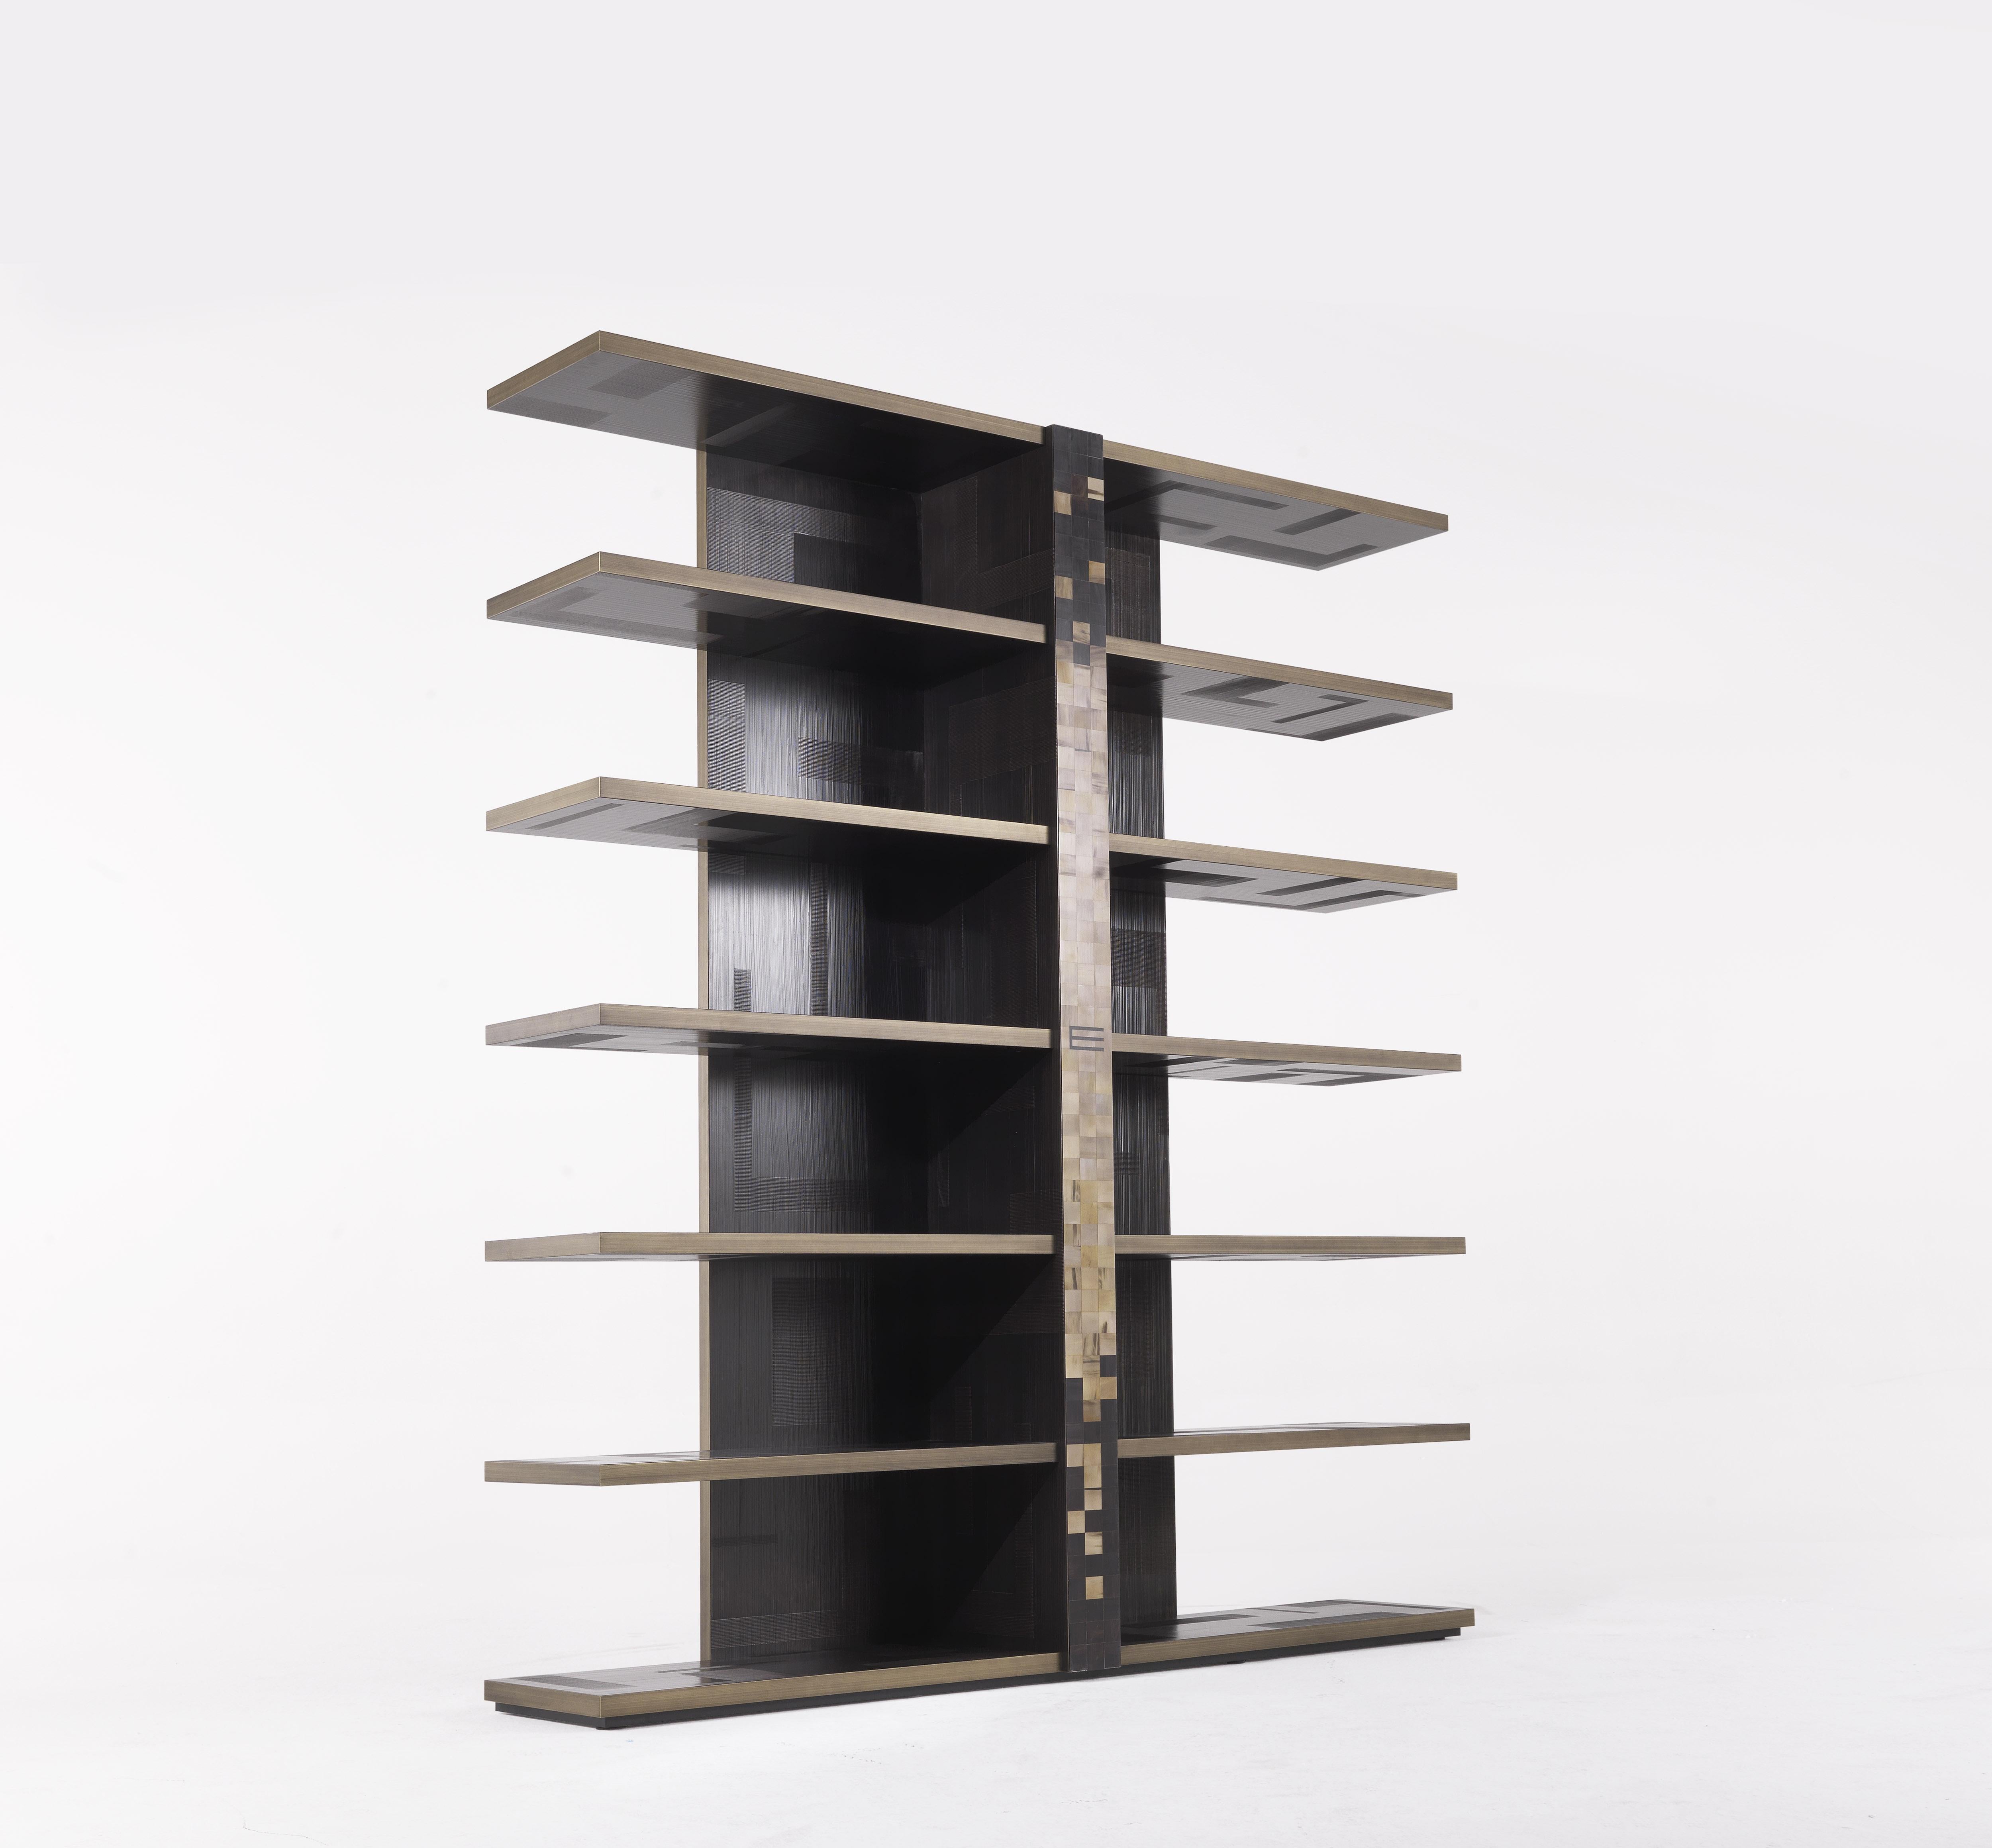 Contemporary design and decorative spirit for the Aleppo bookcase, characterized, in the central spine, by a horn inlay recreating a mosaic pattern, reference to the decorative theme of the Mesopotamian world and to the ethnic spirit that